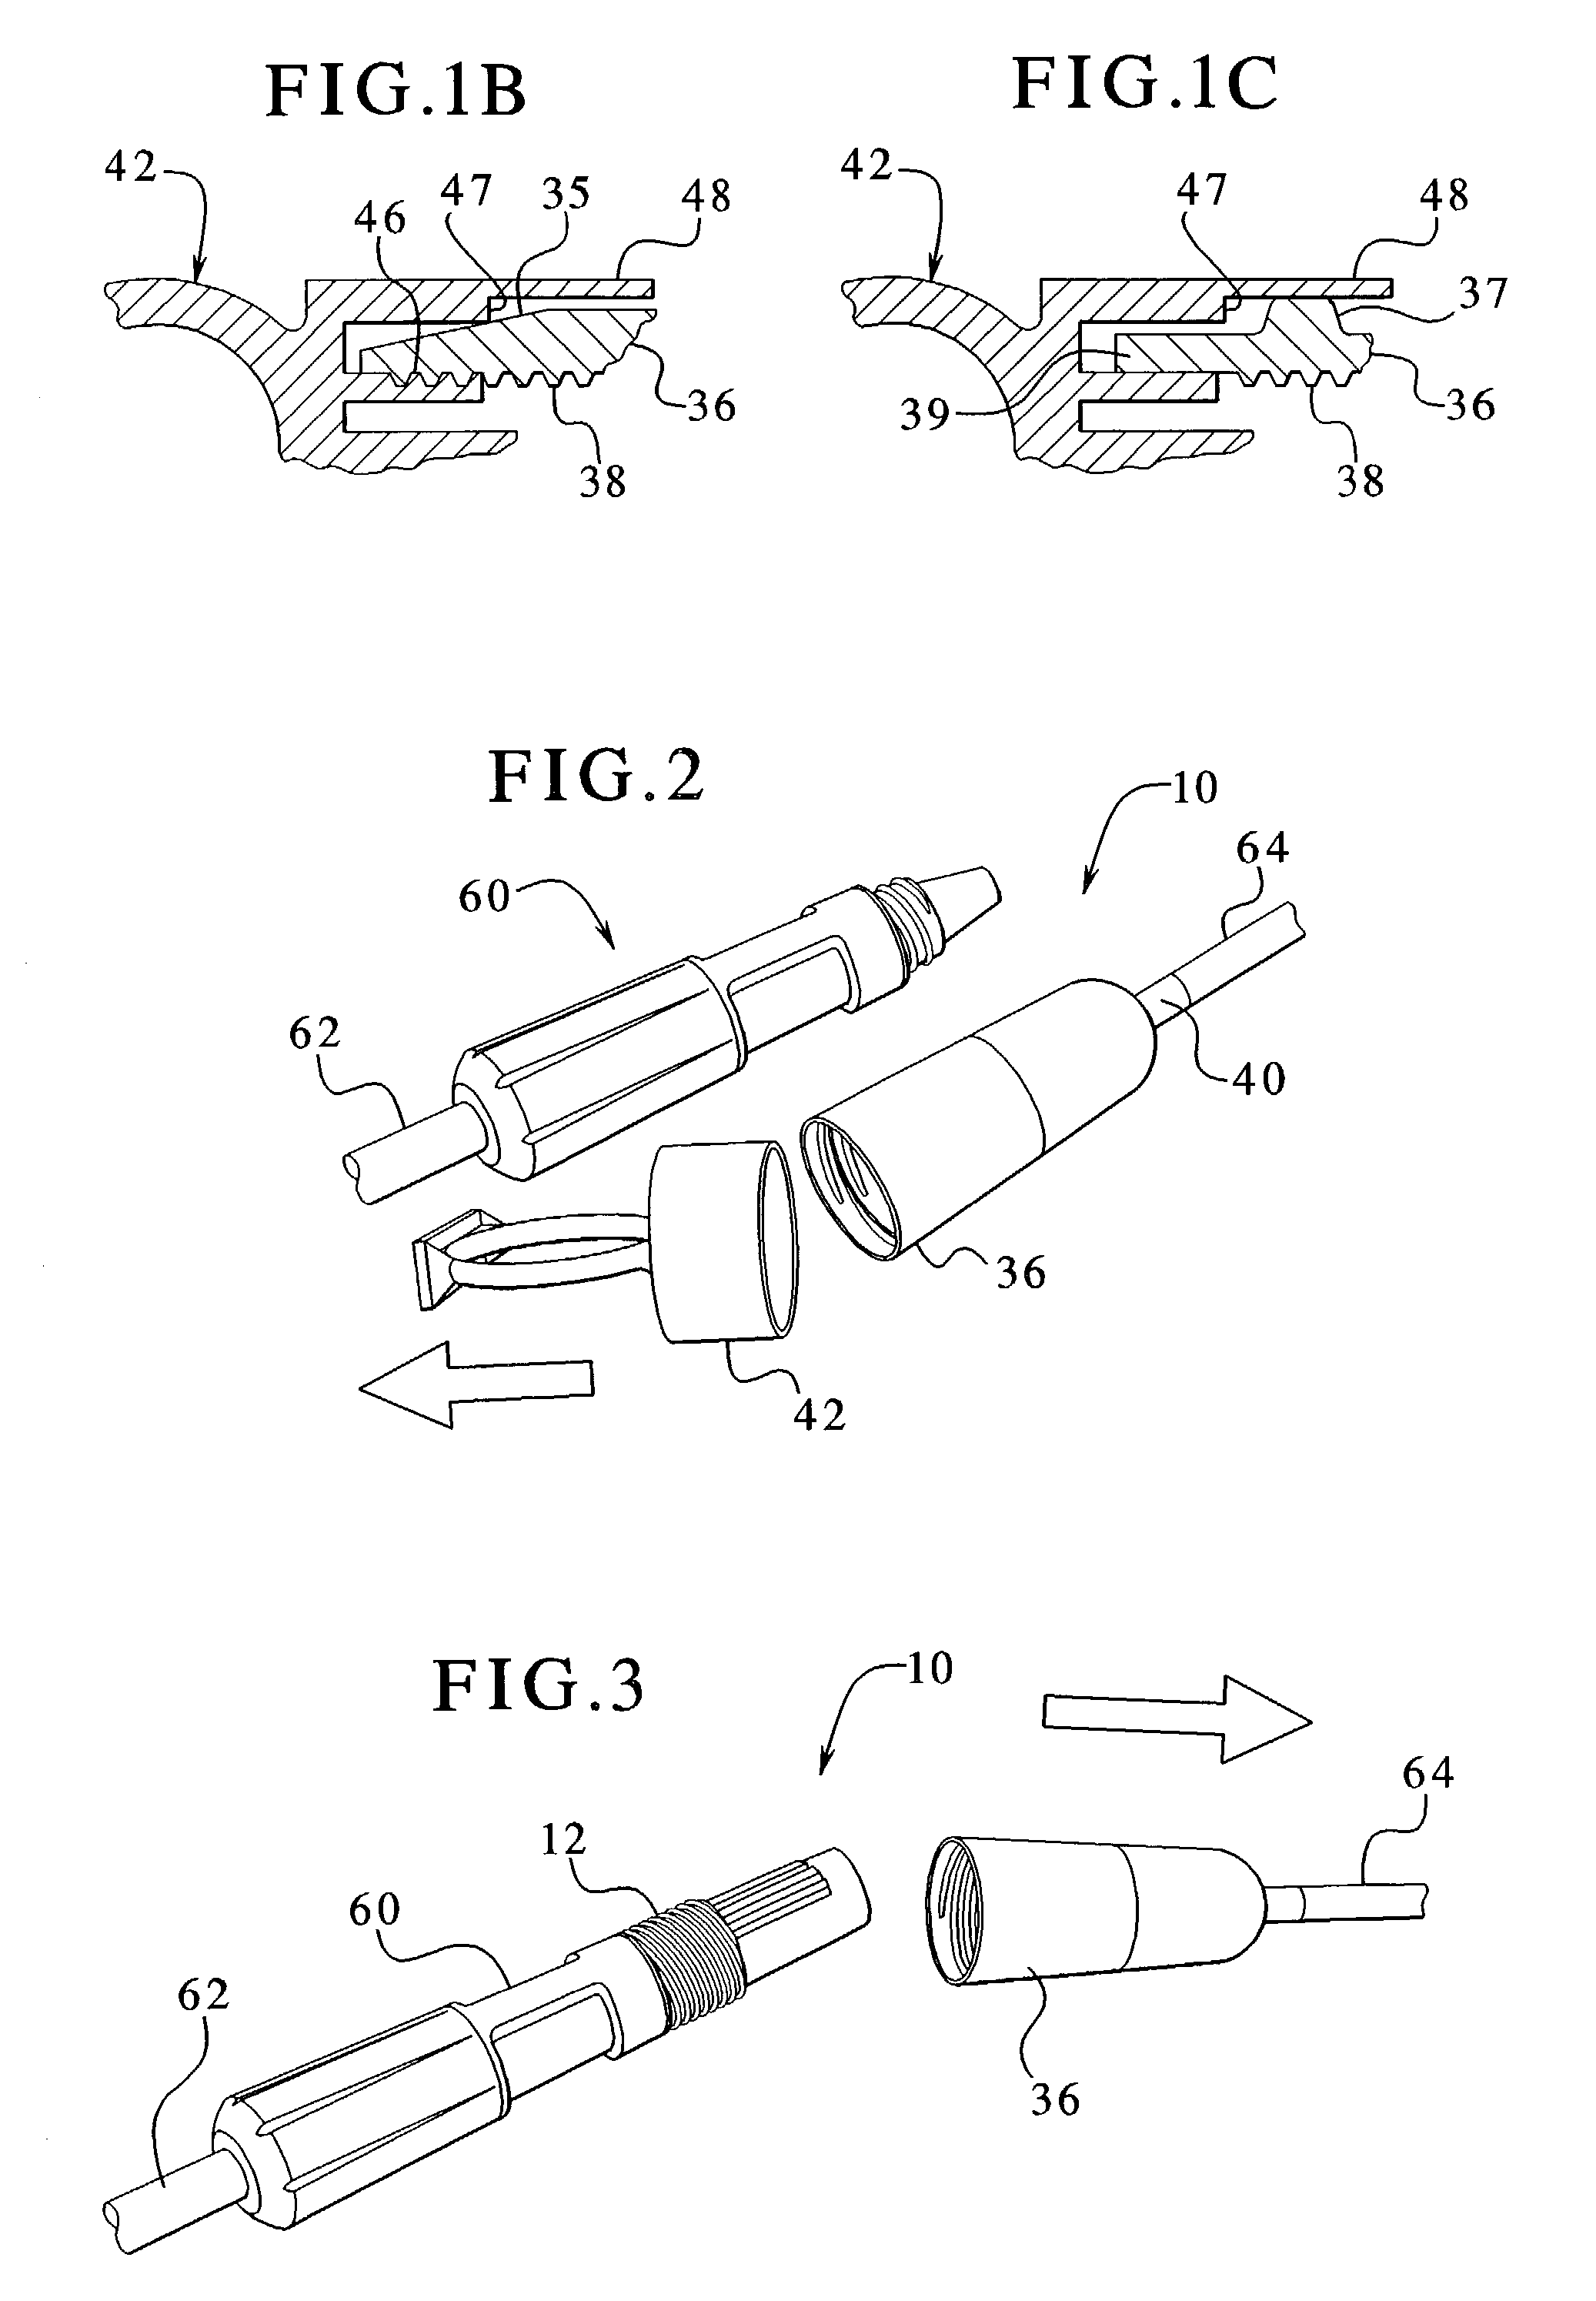 Dialysis connector and cap having an integral disinfectant